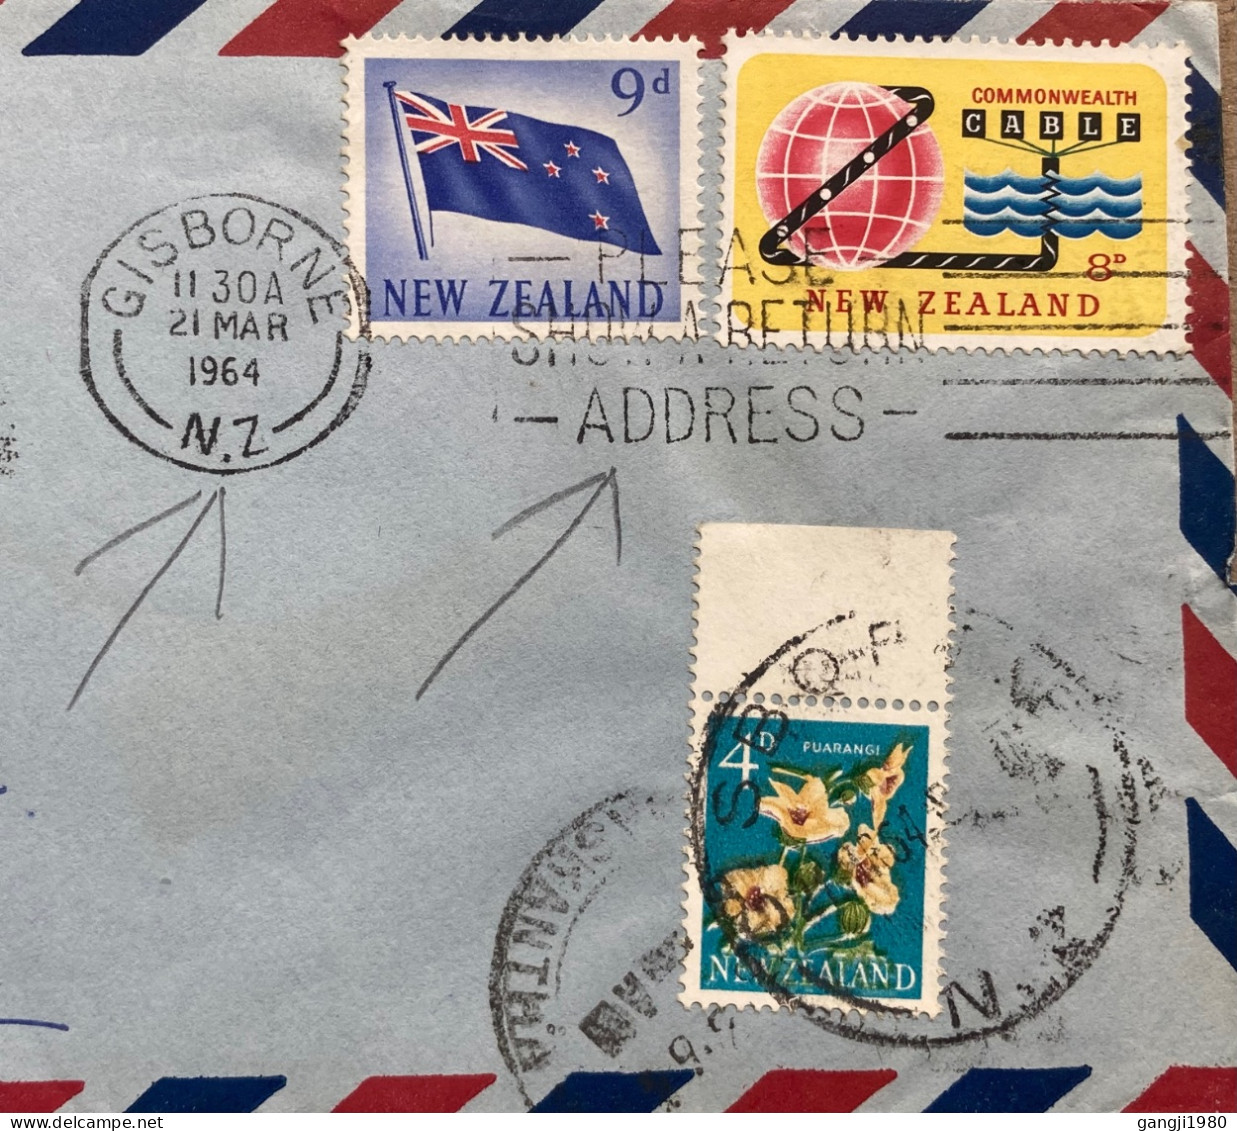 NEW-ZEALAND 1964, COVER USED TO INDIA, 3 DIFF STAMP, FLAG, CABLE, FLOWER, GISBORNE CITY SLOGAN, PLEASE SHOW RETURN ADDRE - Briefe U. Dokumente